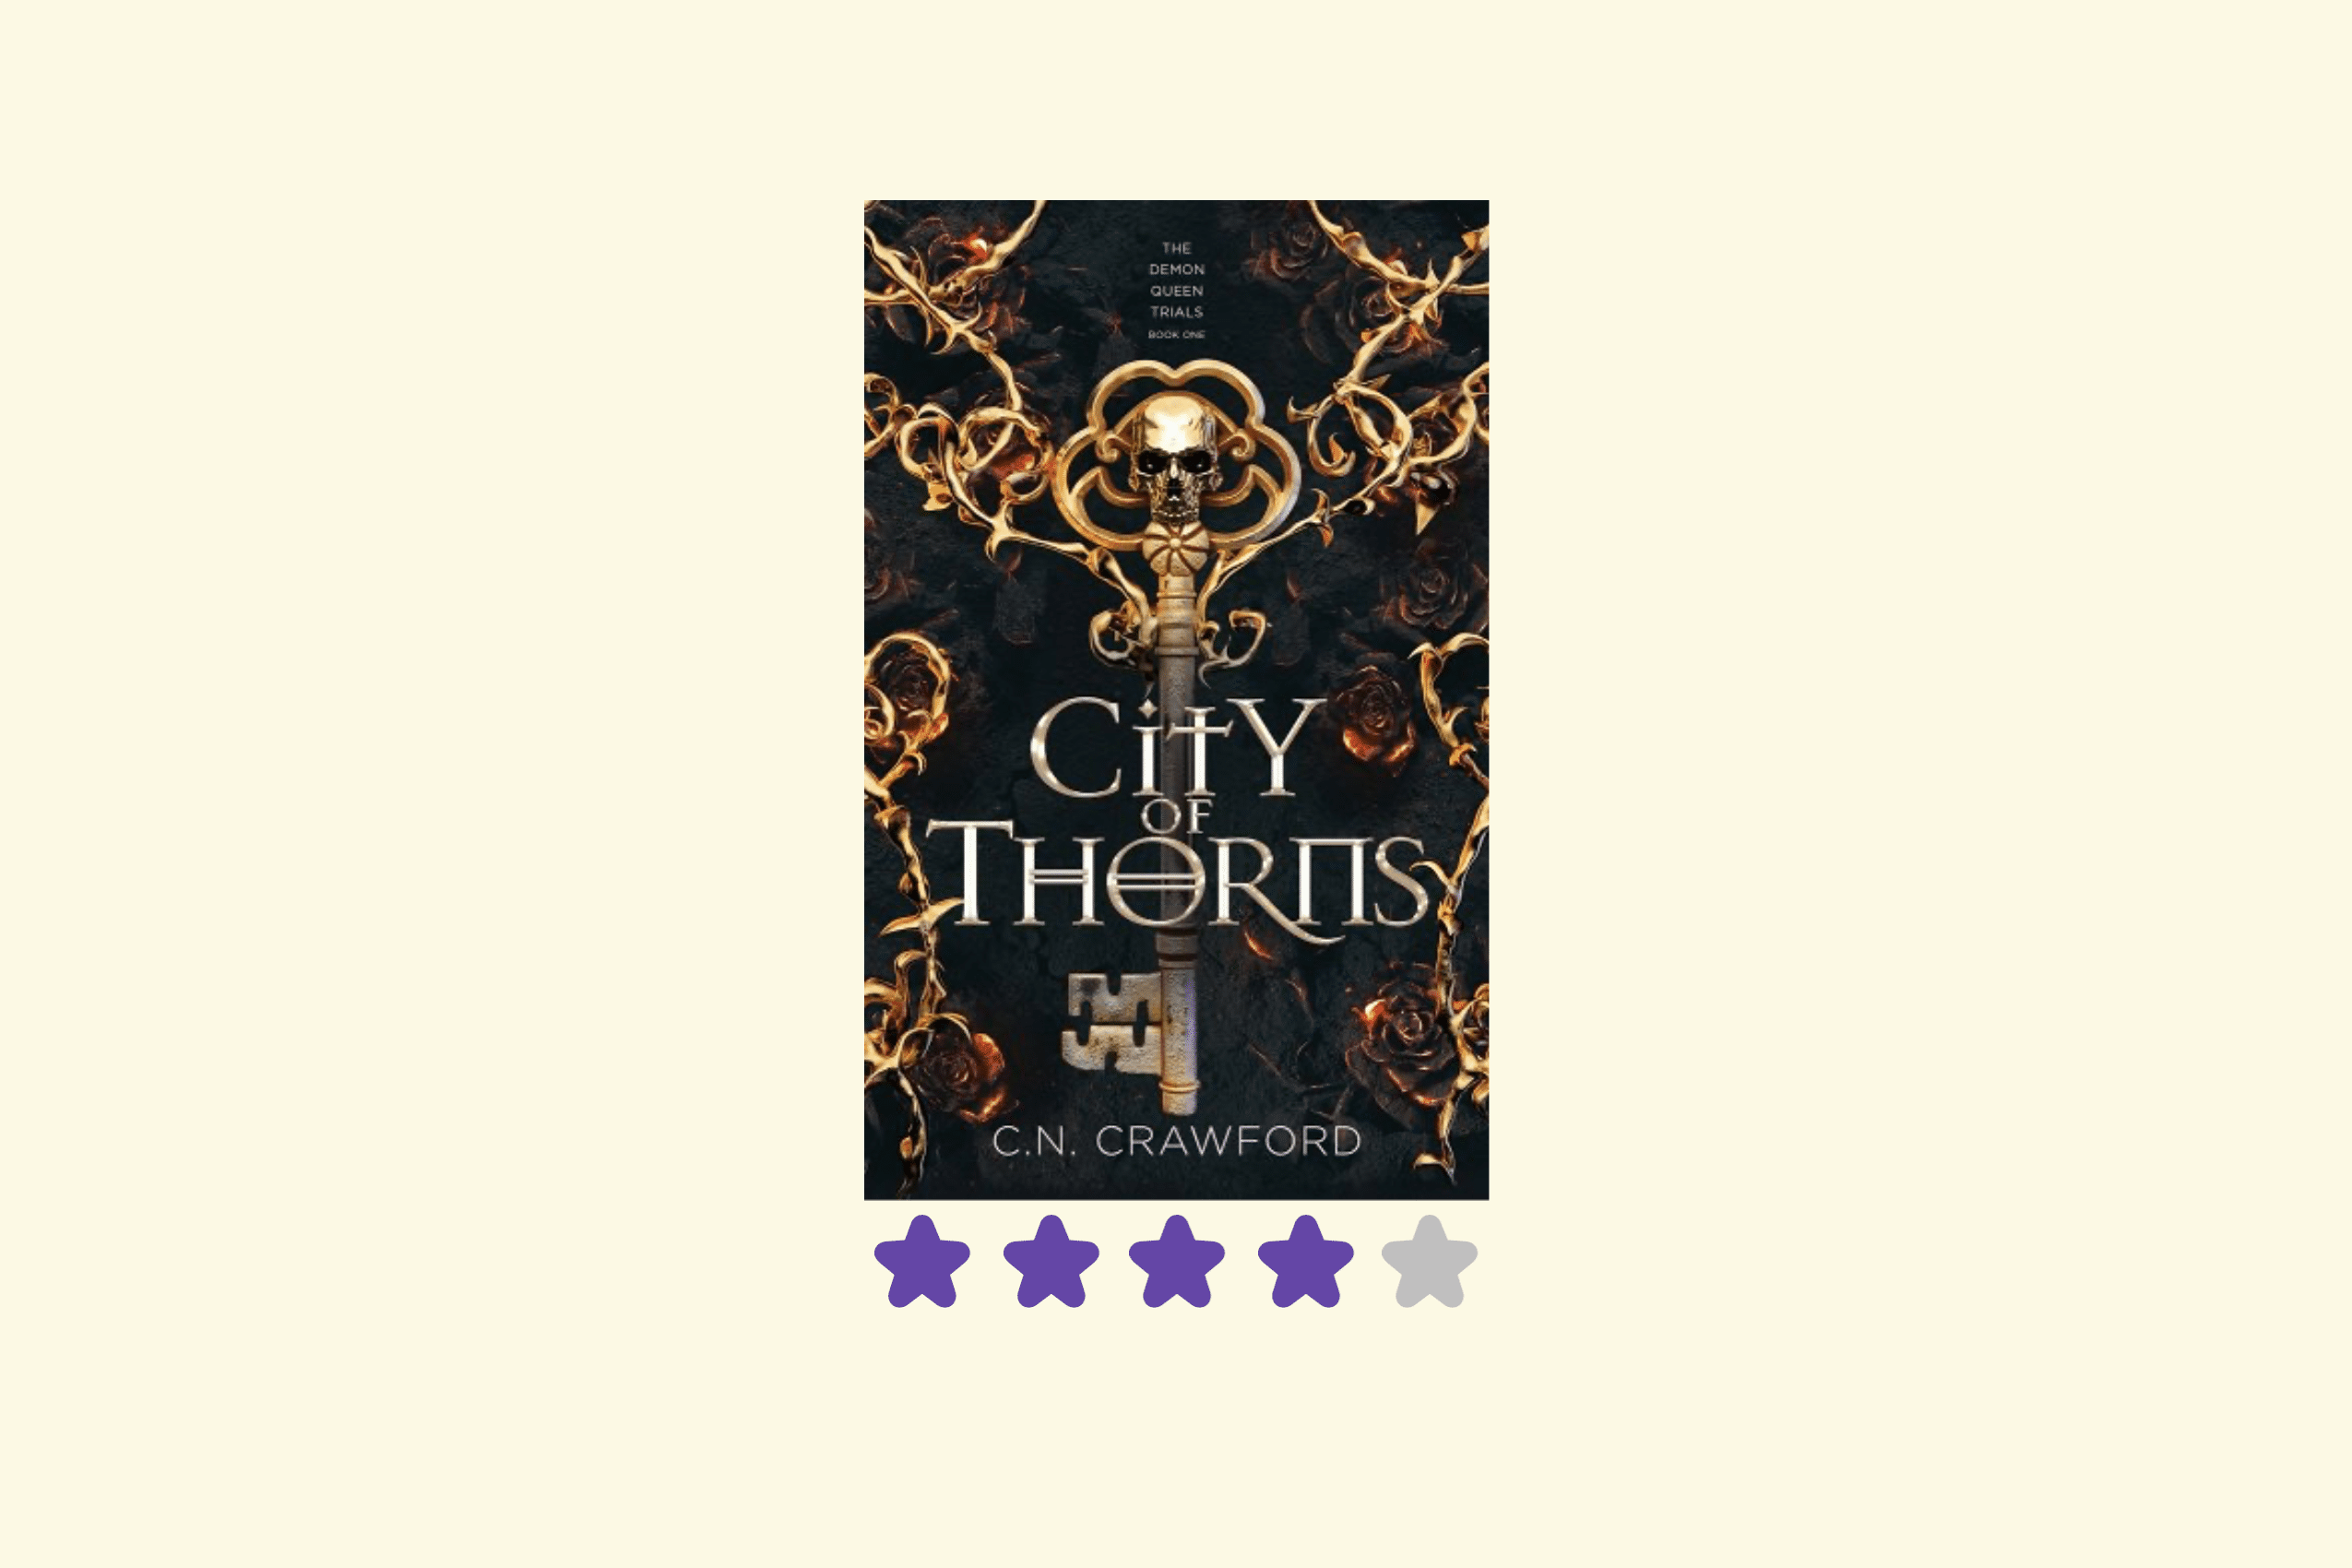 City of Thorns (The Demon Queen Trials, #1) by C.N. Crawford